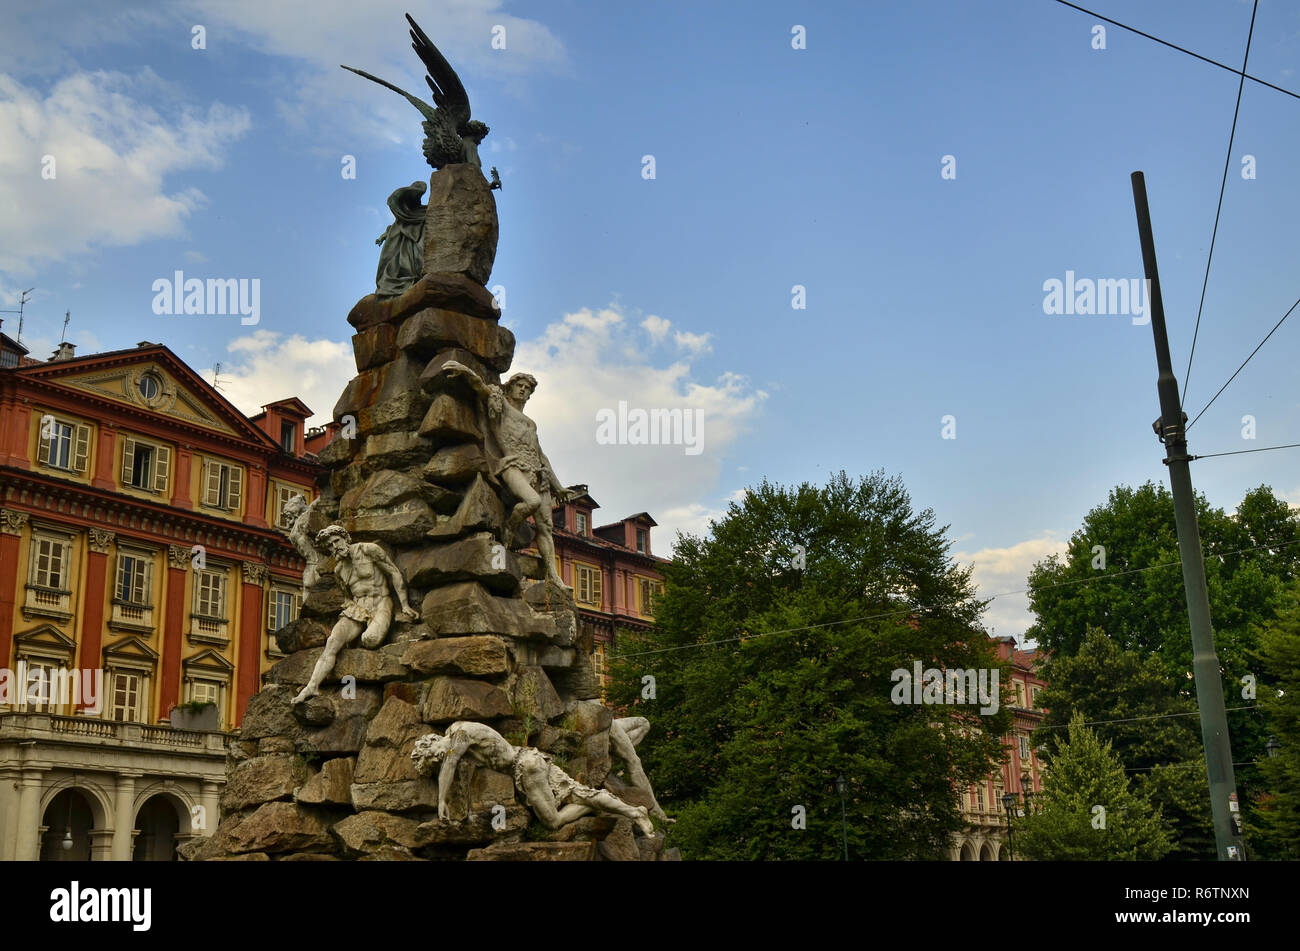 Turin, Piedmont region. Italy, September 2018. Piazza statuto, details of the monument dedicated to the Frejus Tunnel. It is located in the center of  Stock Photo